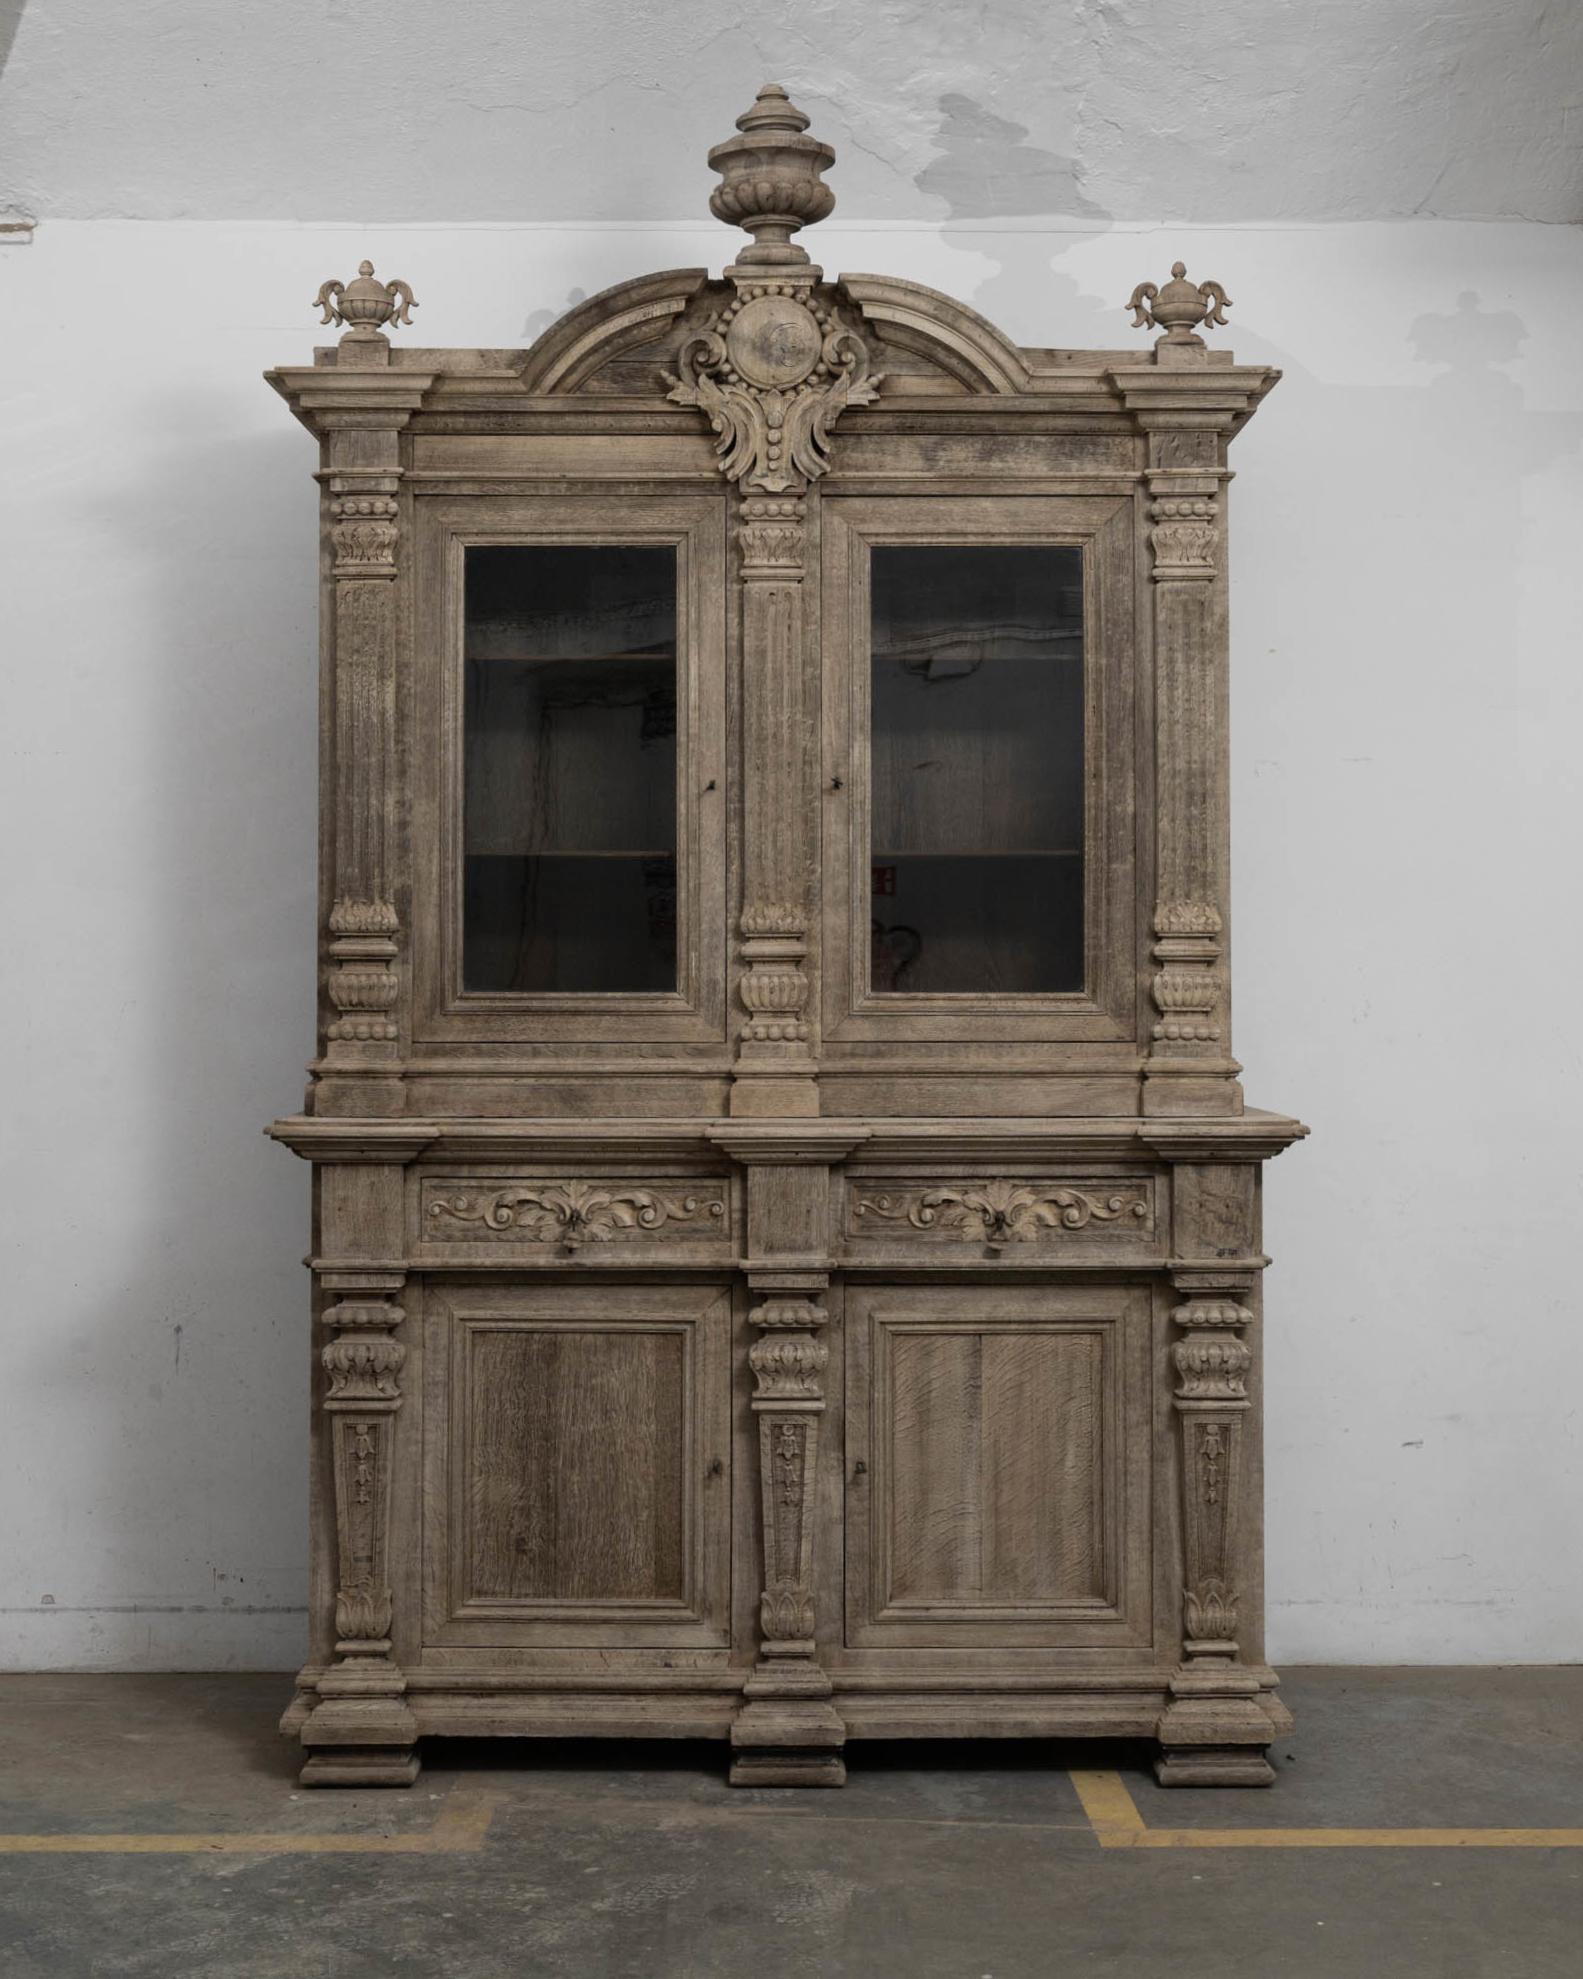 Magnificent and ornate, this antique oak vitrine cuts an impressive figure. Built in Belgium in the 1860s, the design is inspired by the elaborate furniture of the Renaissance. Beautifully carved urns crown the cabinet, evoking those found in the